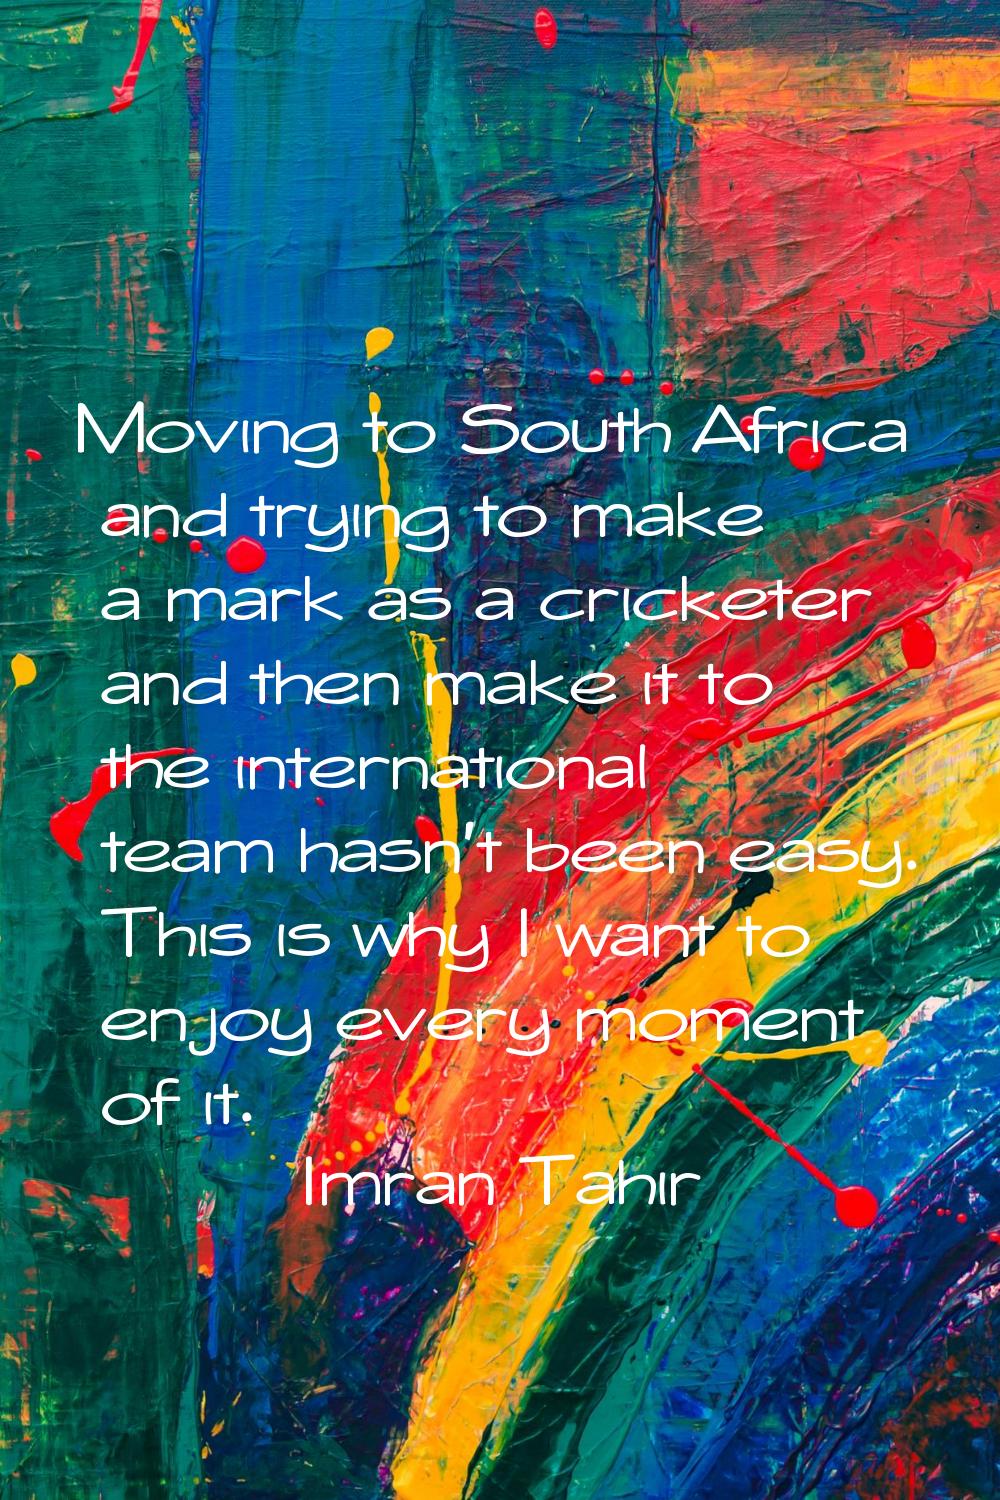 Moving to South Africa and trying to make a mark as a cricketer and then make it to the internation